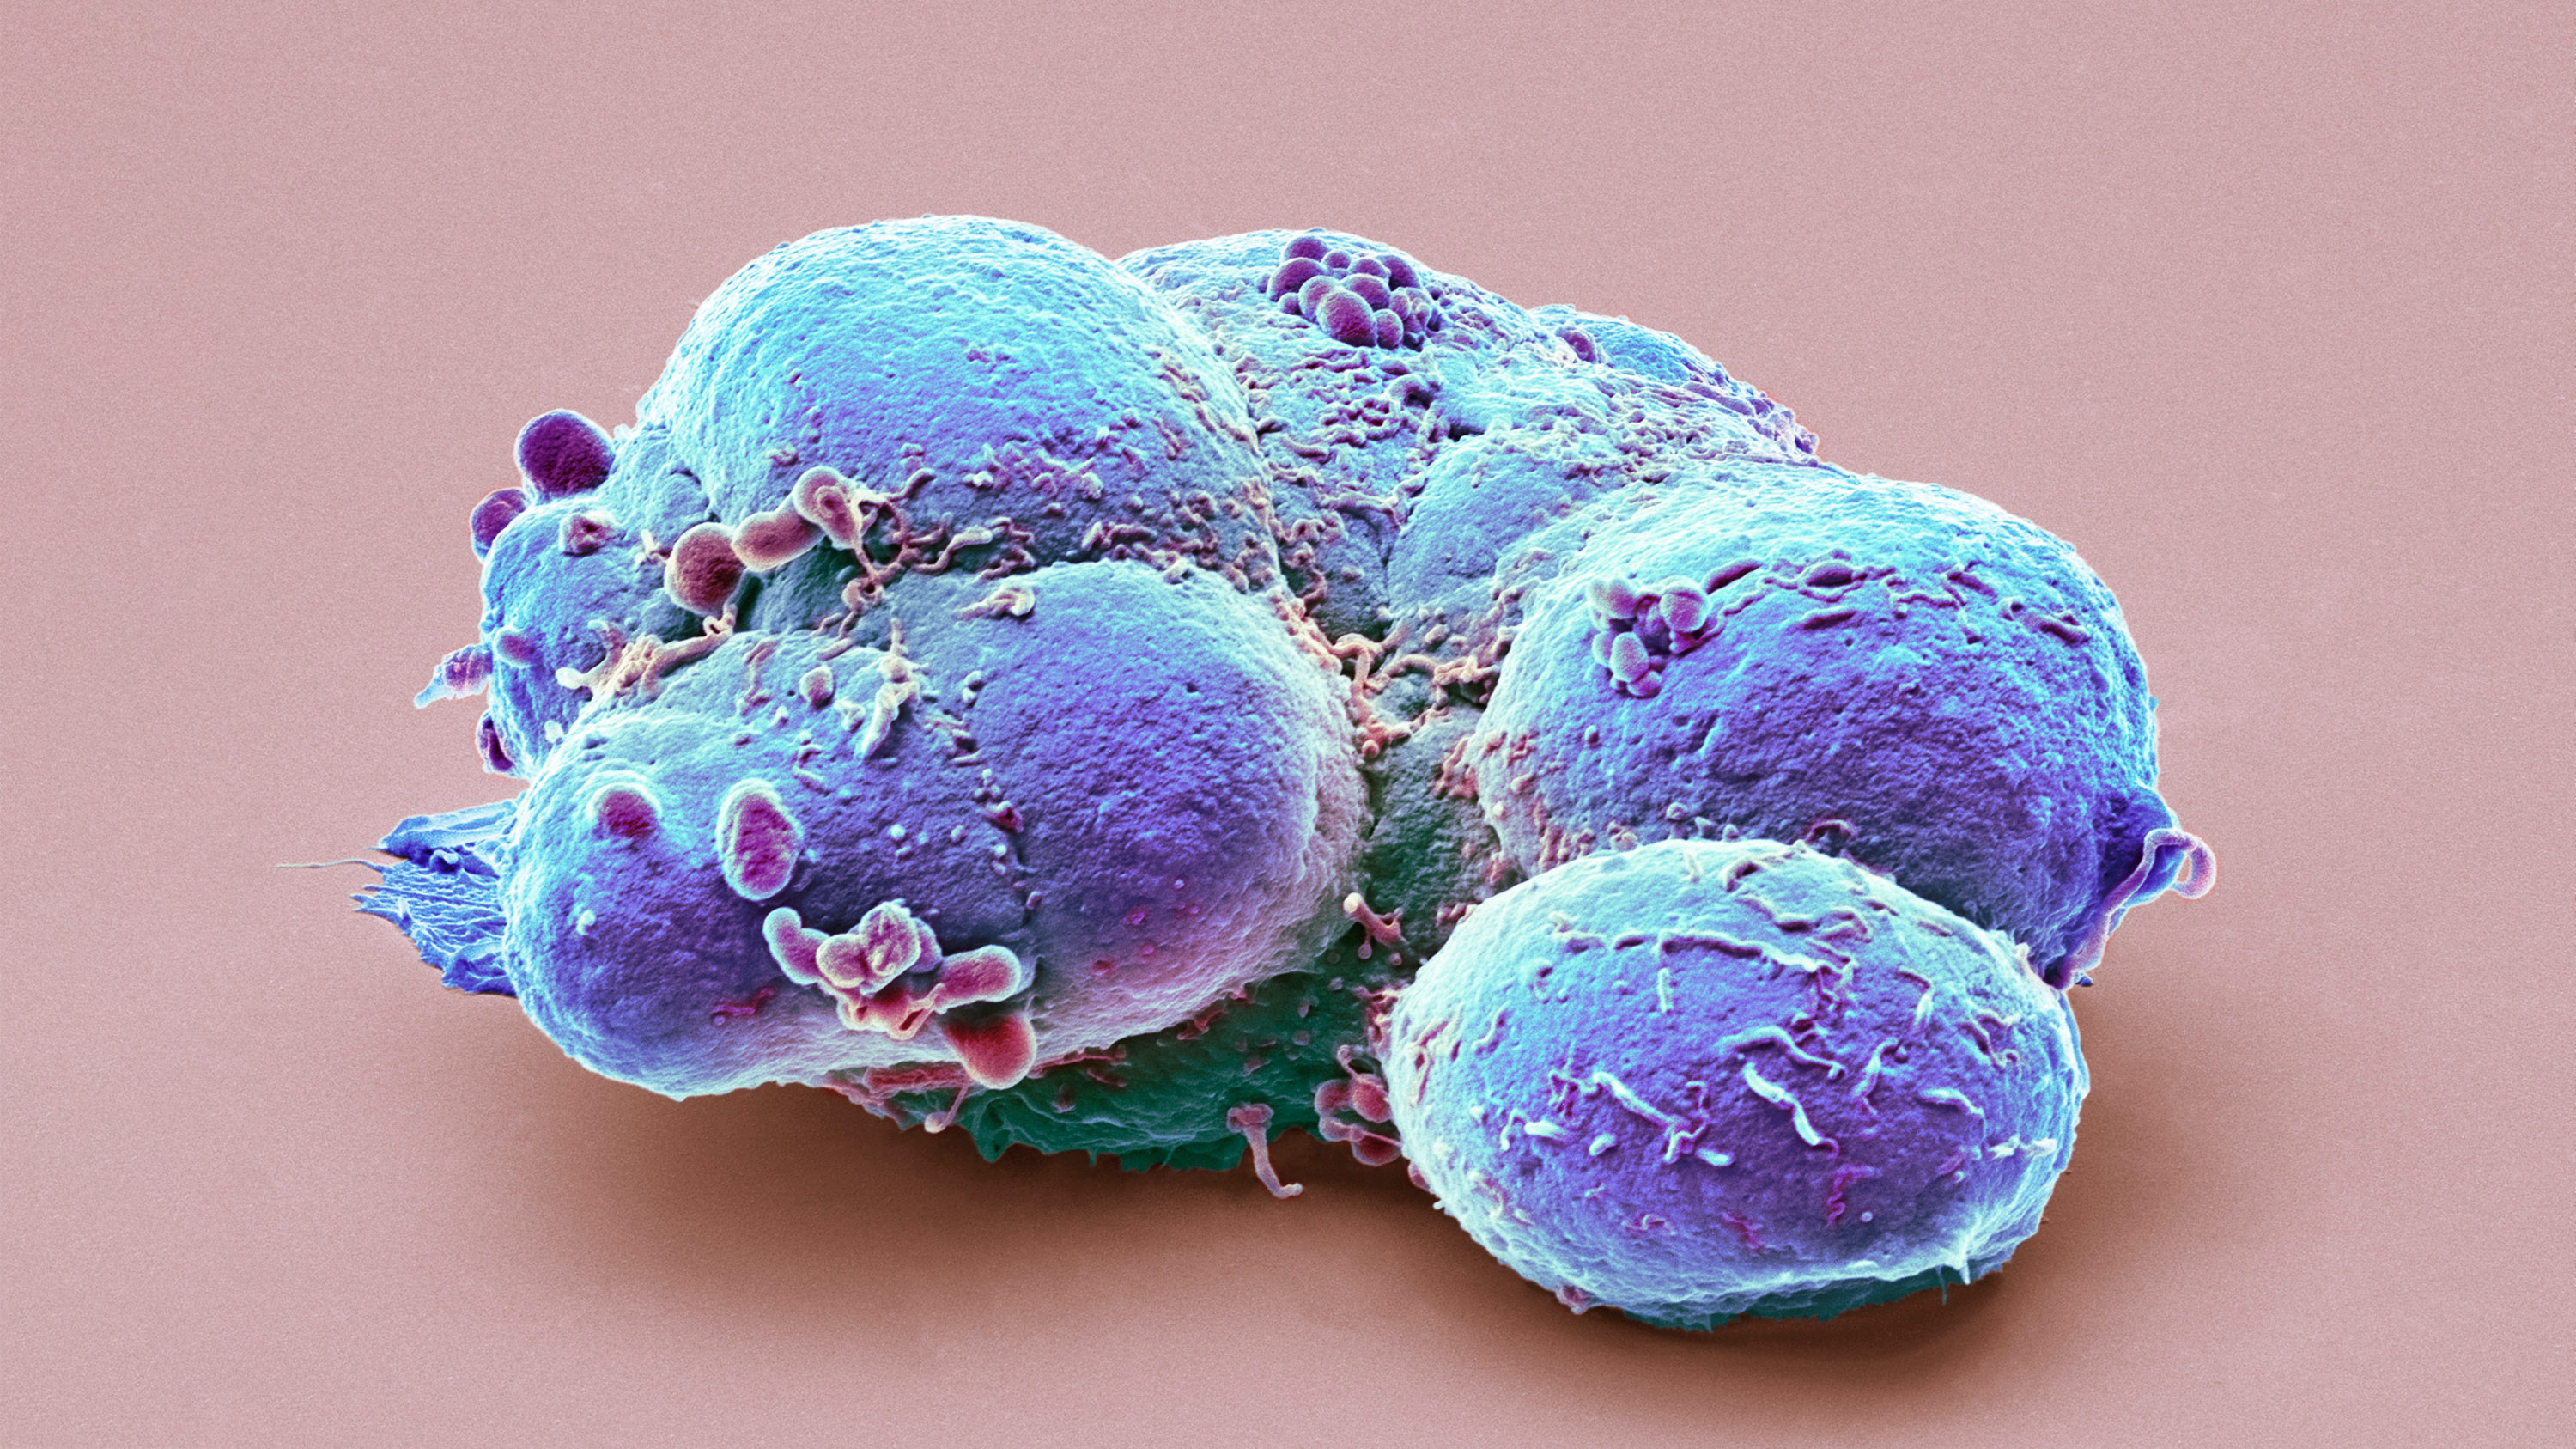 Colored scanning electron micrograph (SEM) of a clump of pluripotent embryonic stem cells.